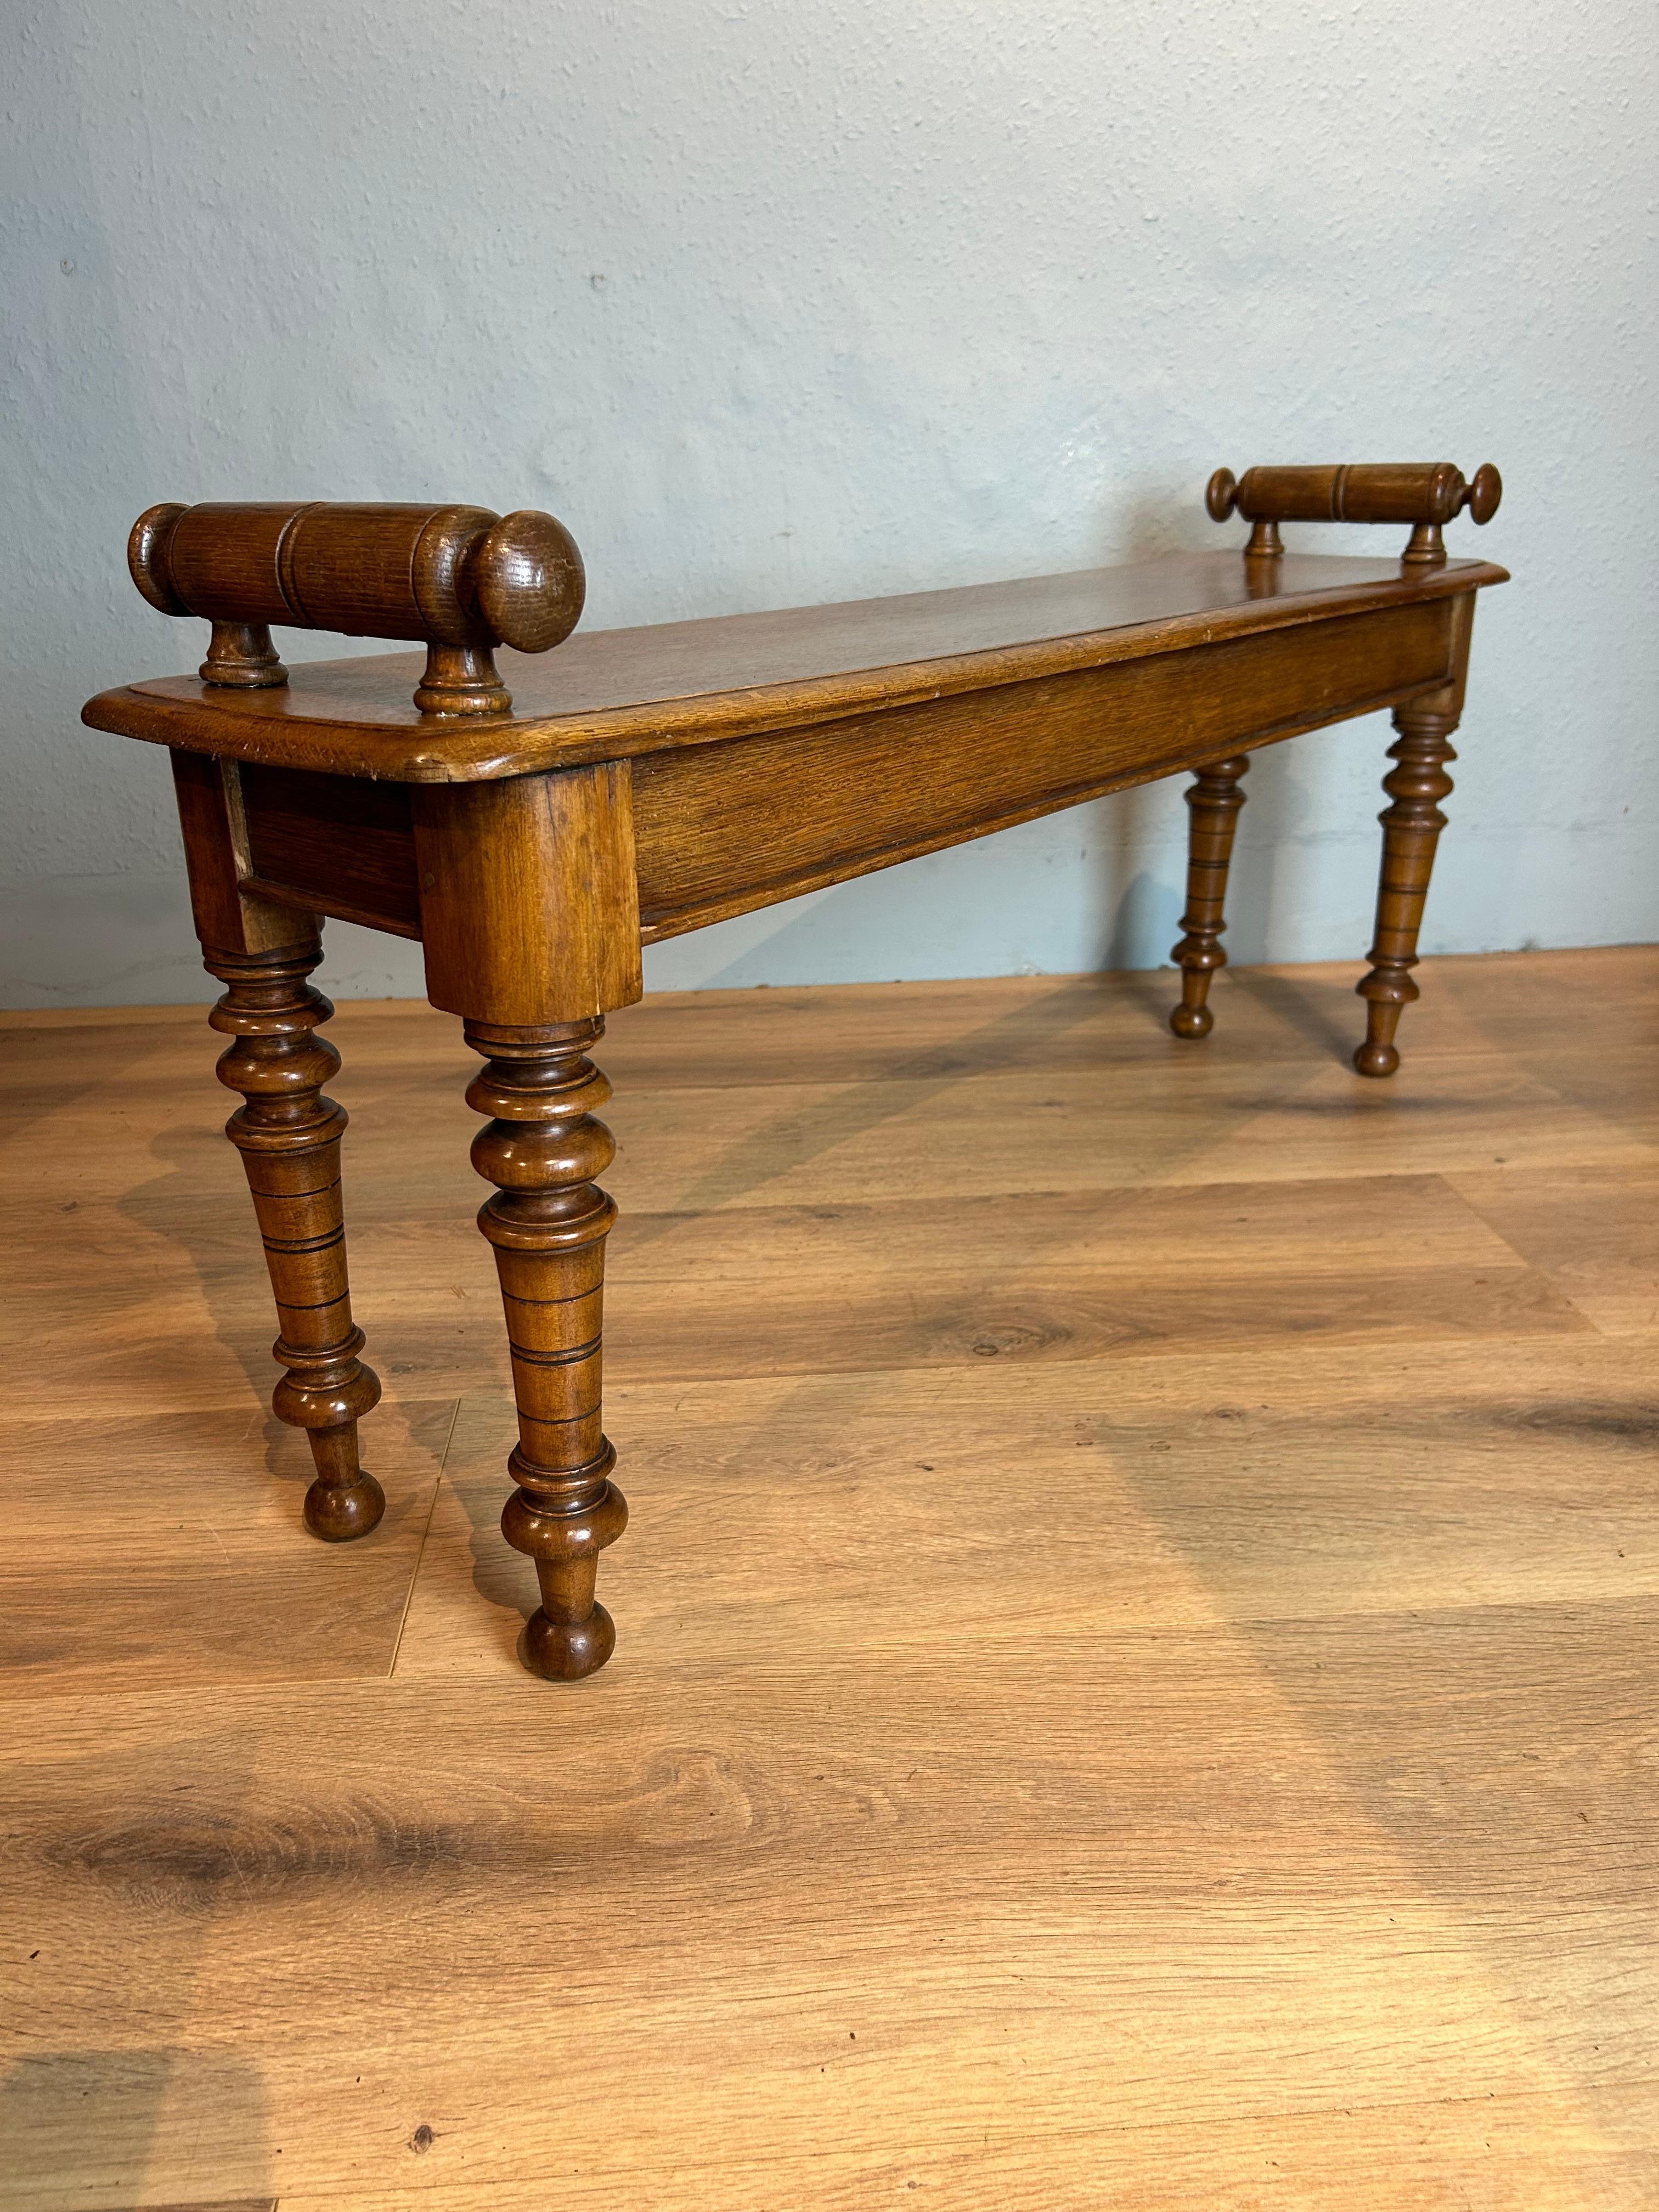 Antique English Victorian oak hall bench circa 1860 with raised bolster turned ends on a solid moulded seat resting on ornate turned legs with a pleasant honey colour.